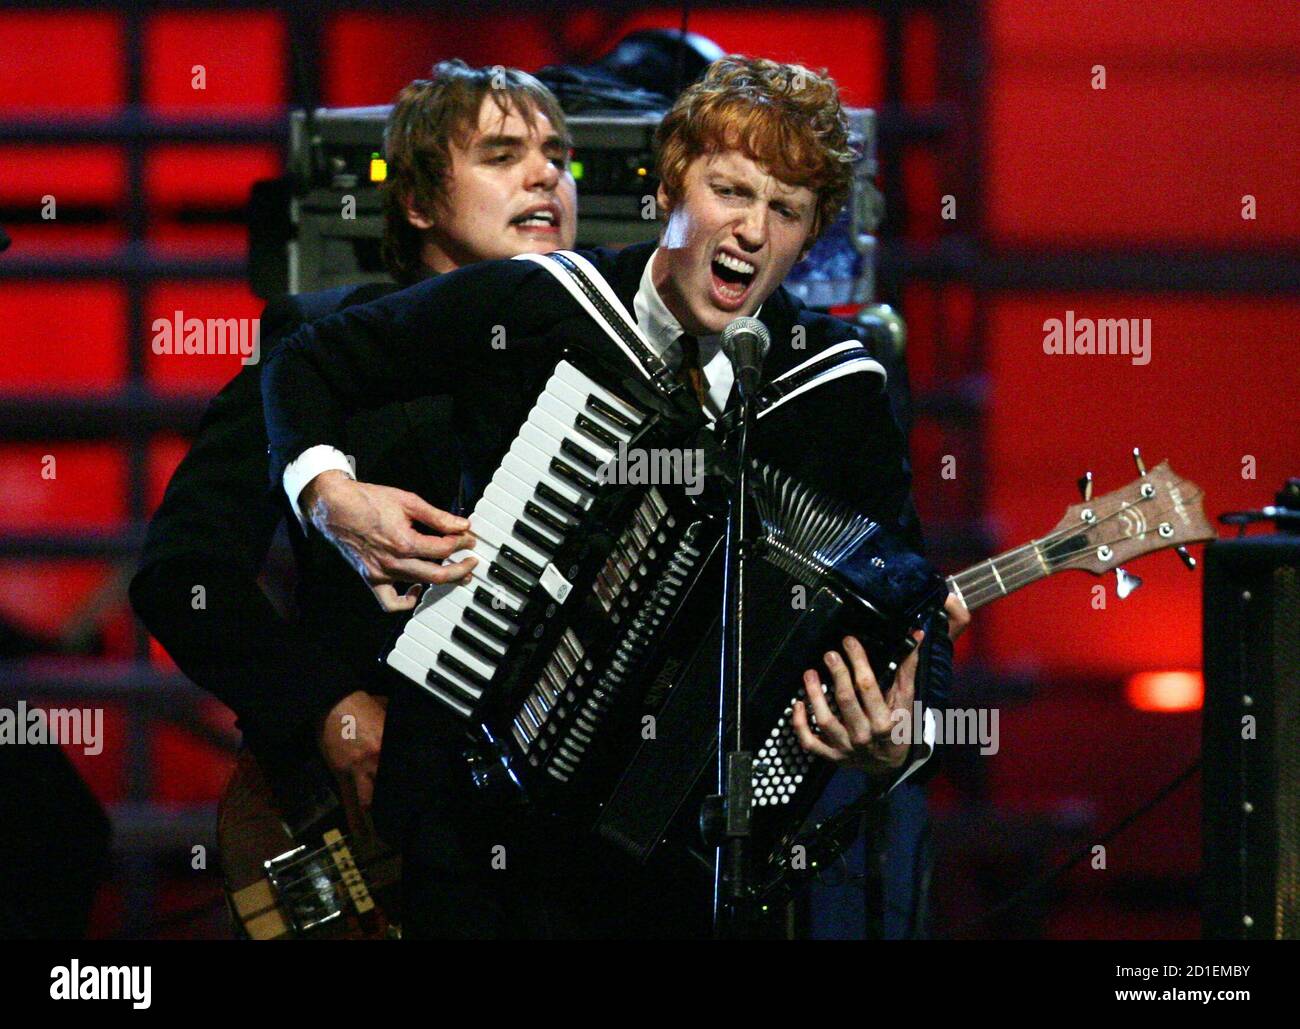 Members of the Canadian band Arcadia Fire perform during the Fashion Rocks concert at New York City's Radio City Music Hall, September 8, 2005. All proceeds from the concert were being donated to hurricaine Katrina relief by the Conde Naste Media Group. REUTERS/Mike Segar  MS/AT Stock Photo